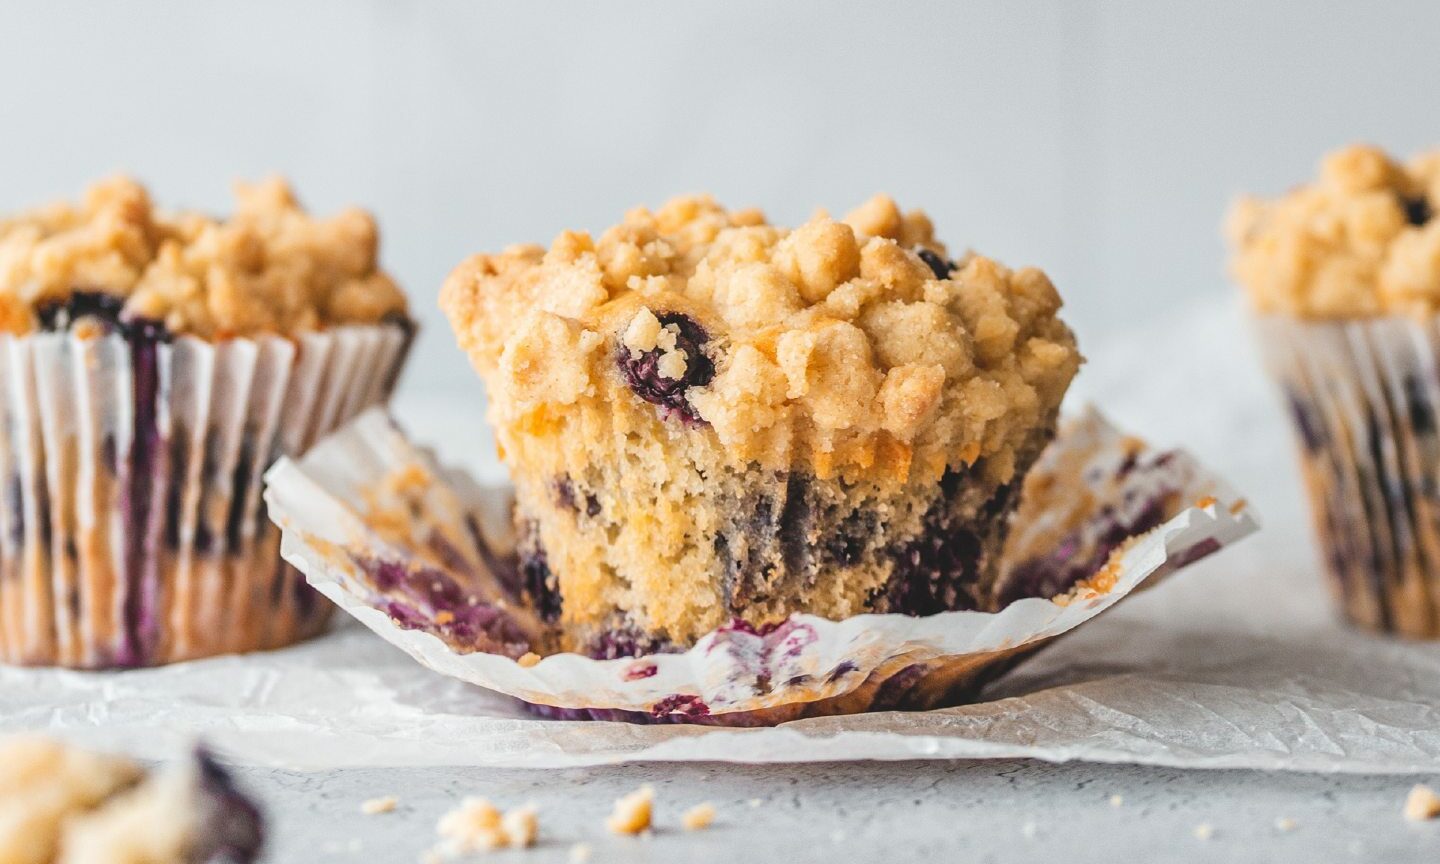 Bakery-style blueberry muffins.